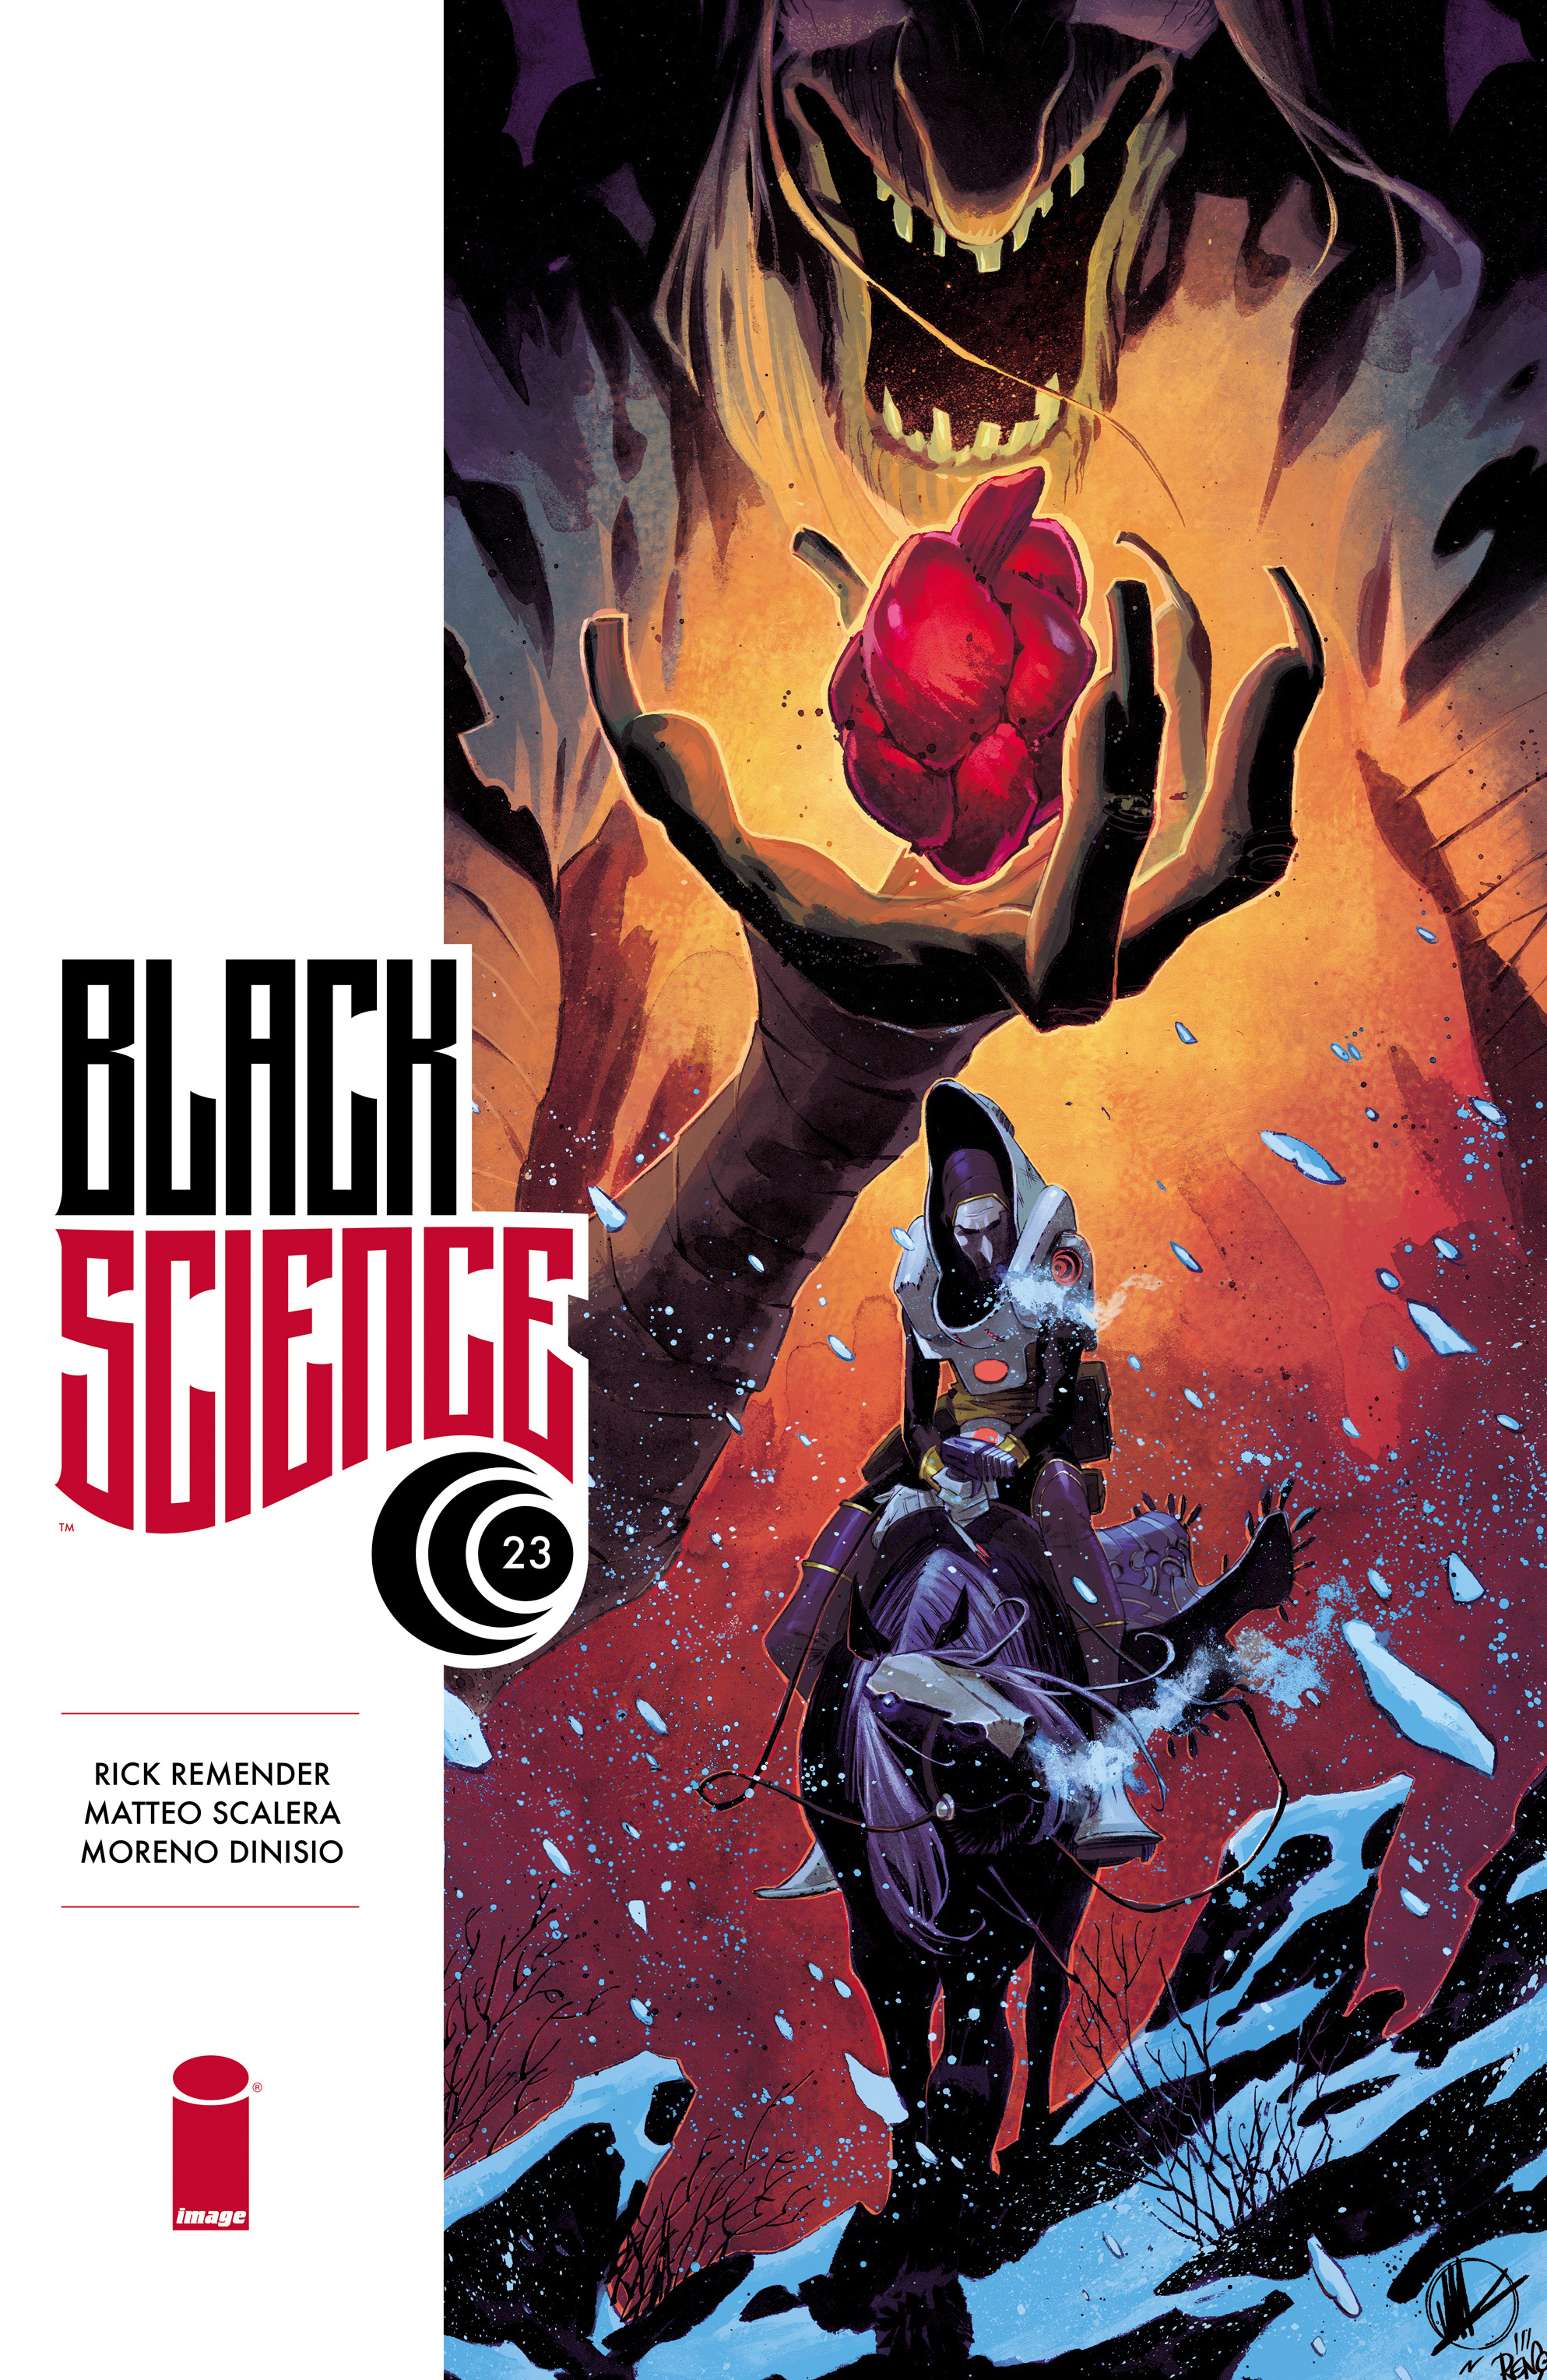 Read online Black Science comic -  Issue #23 - 1